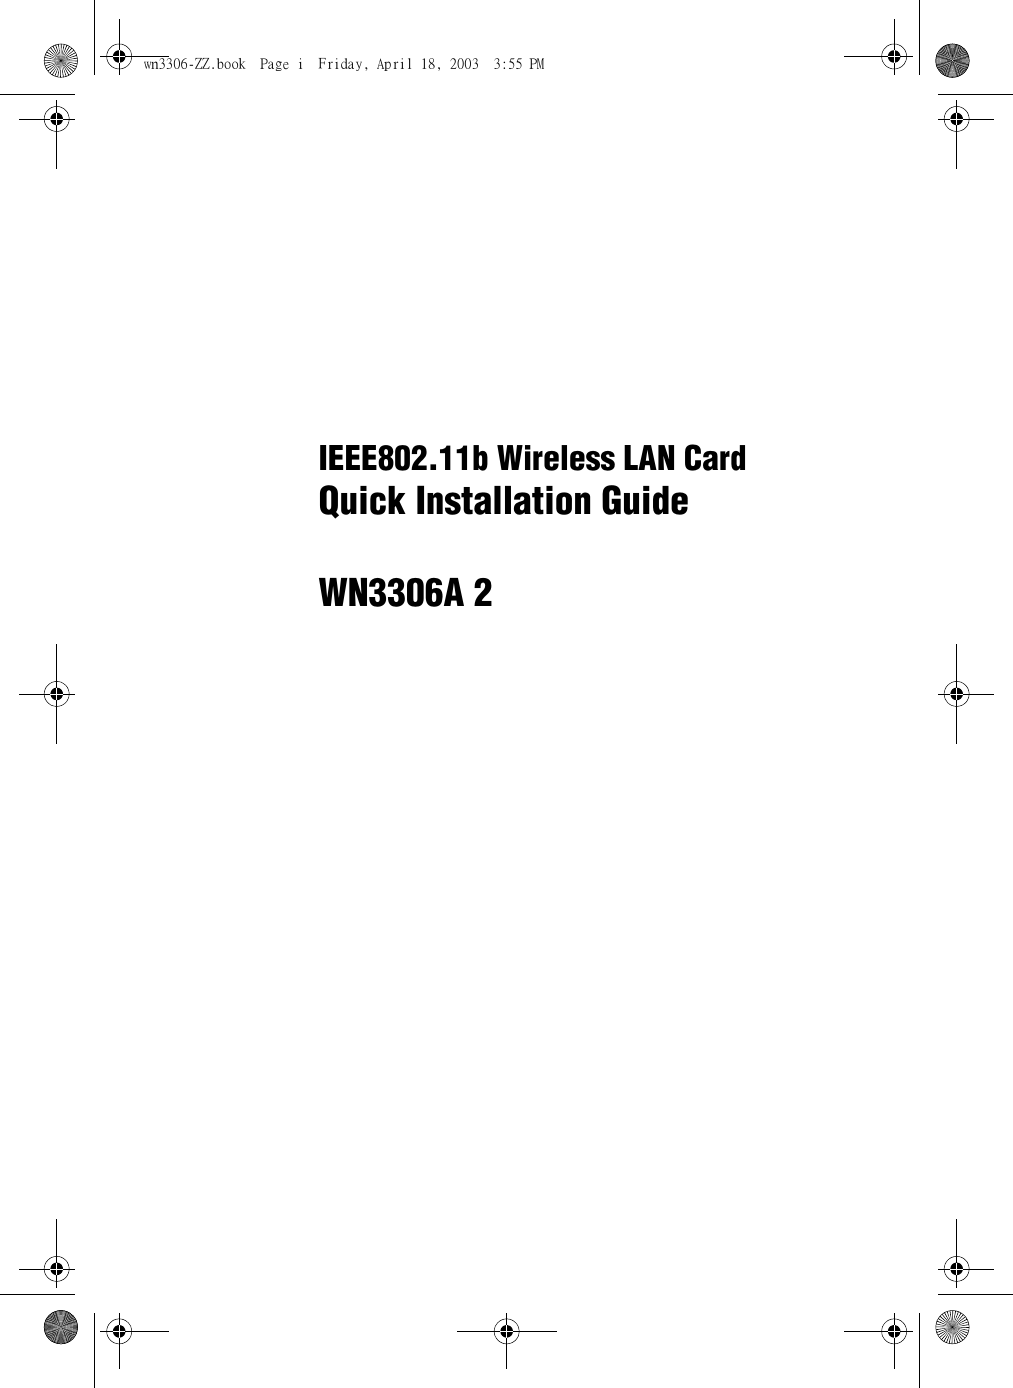 IEEE802.11b Wireless LAN CardQuick Installation GuideWN3306A 2wn3306-ZZ.book  Page i  Friday, April 18, 2003  3:55 PM